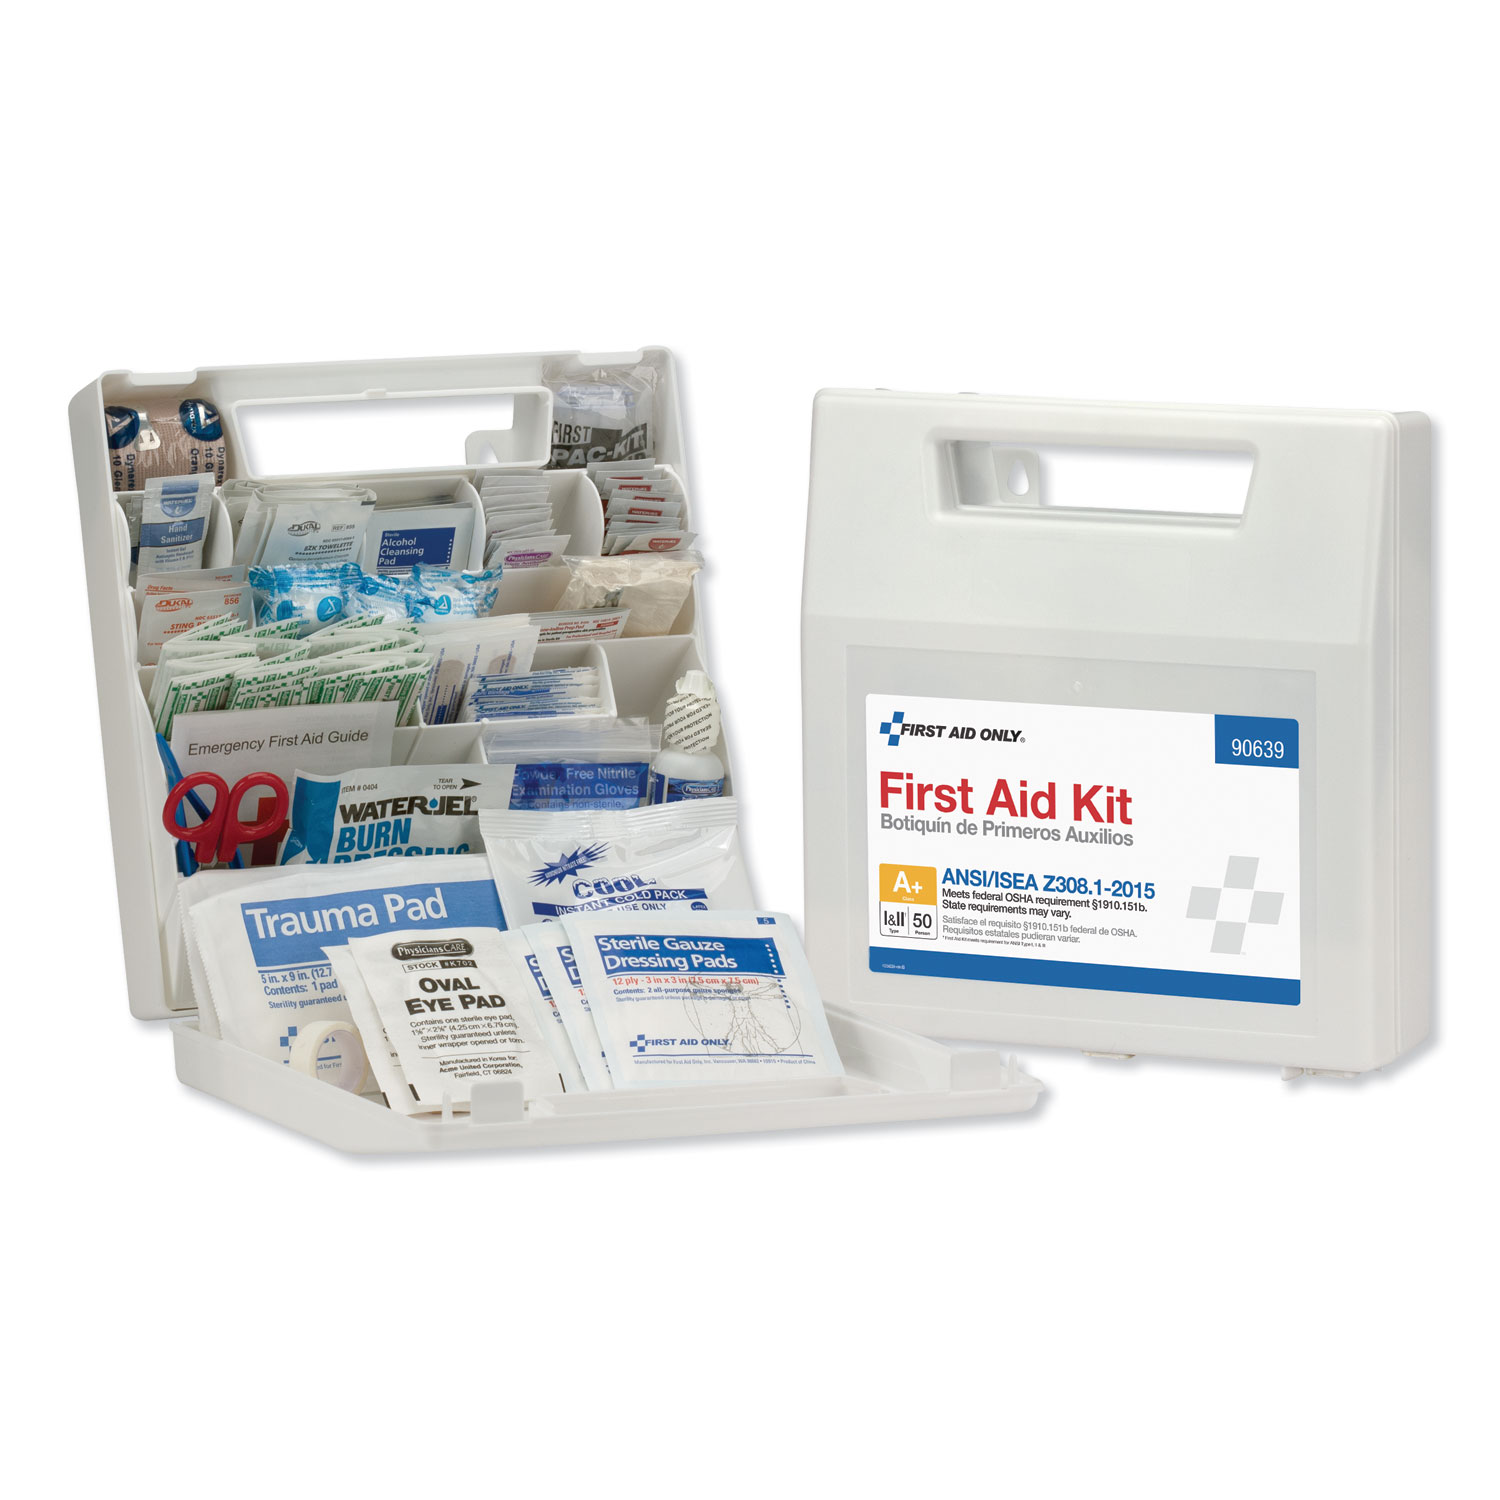 ANSI Class A+ First Aid Kit for 50 People, 183 Pieces, Plastic Case